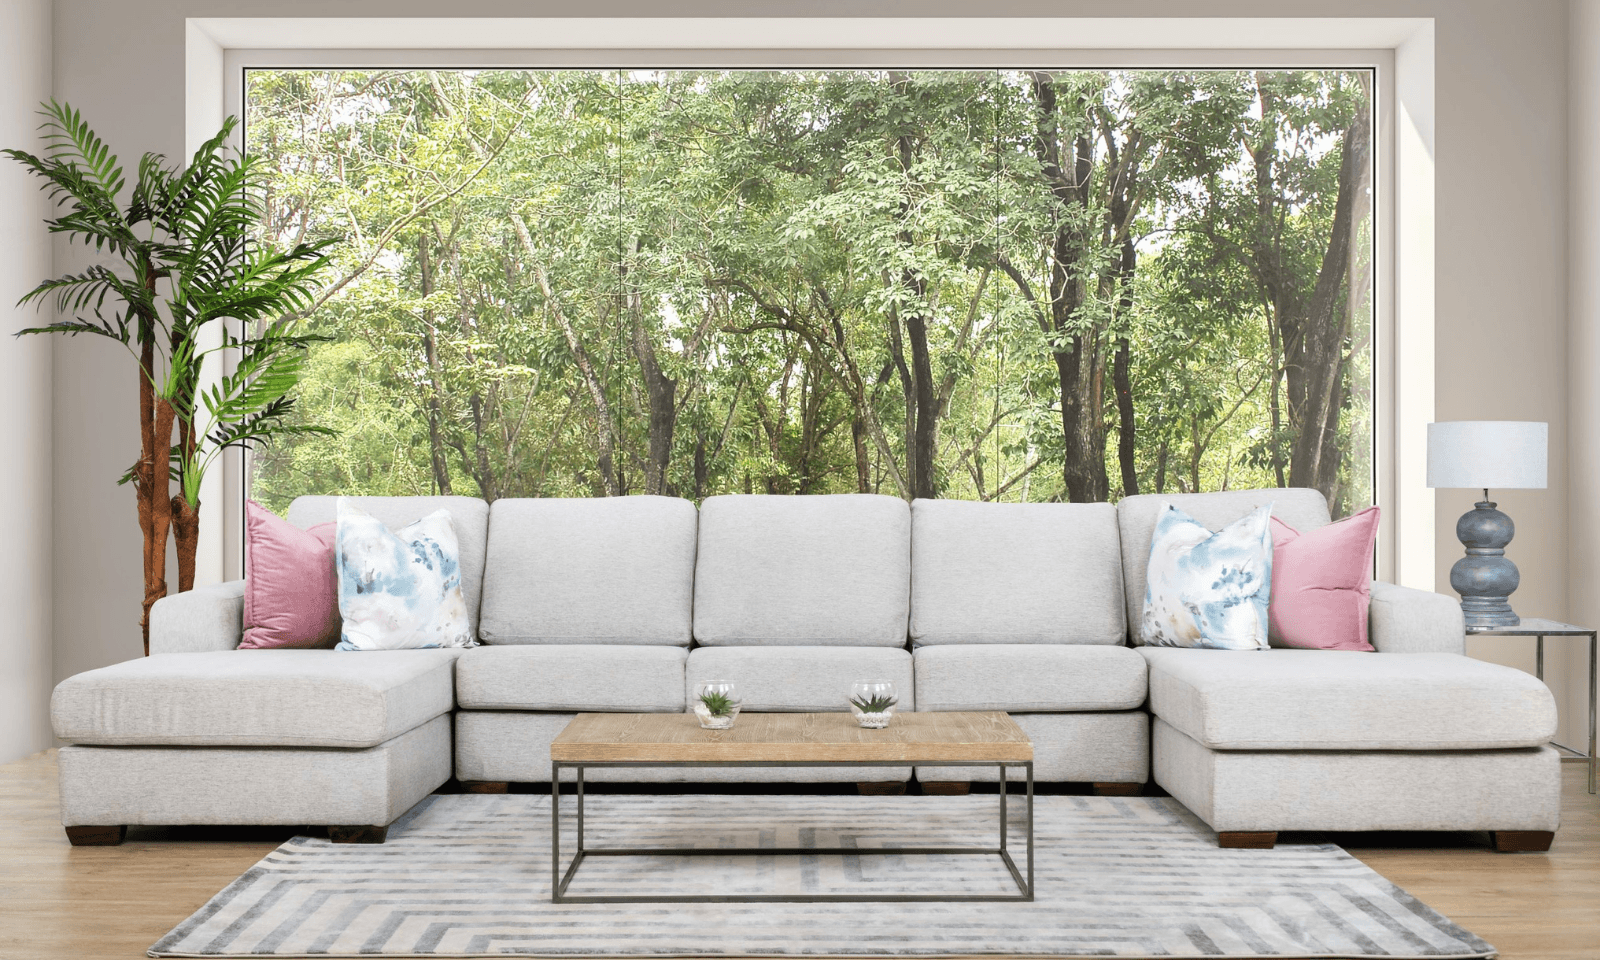 HOW TO STYLE A SECTIONAL IN A BIG LIVING ROOM